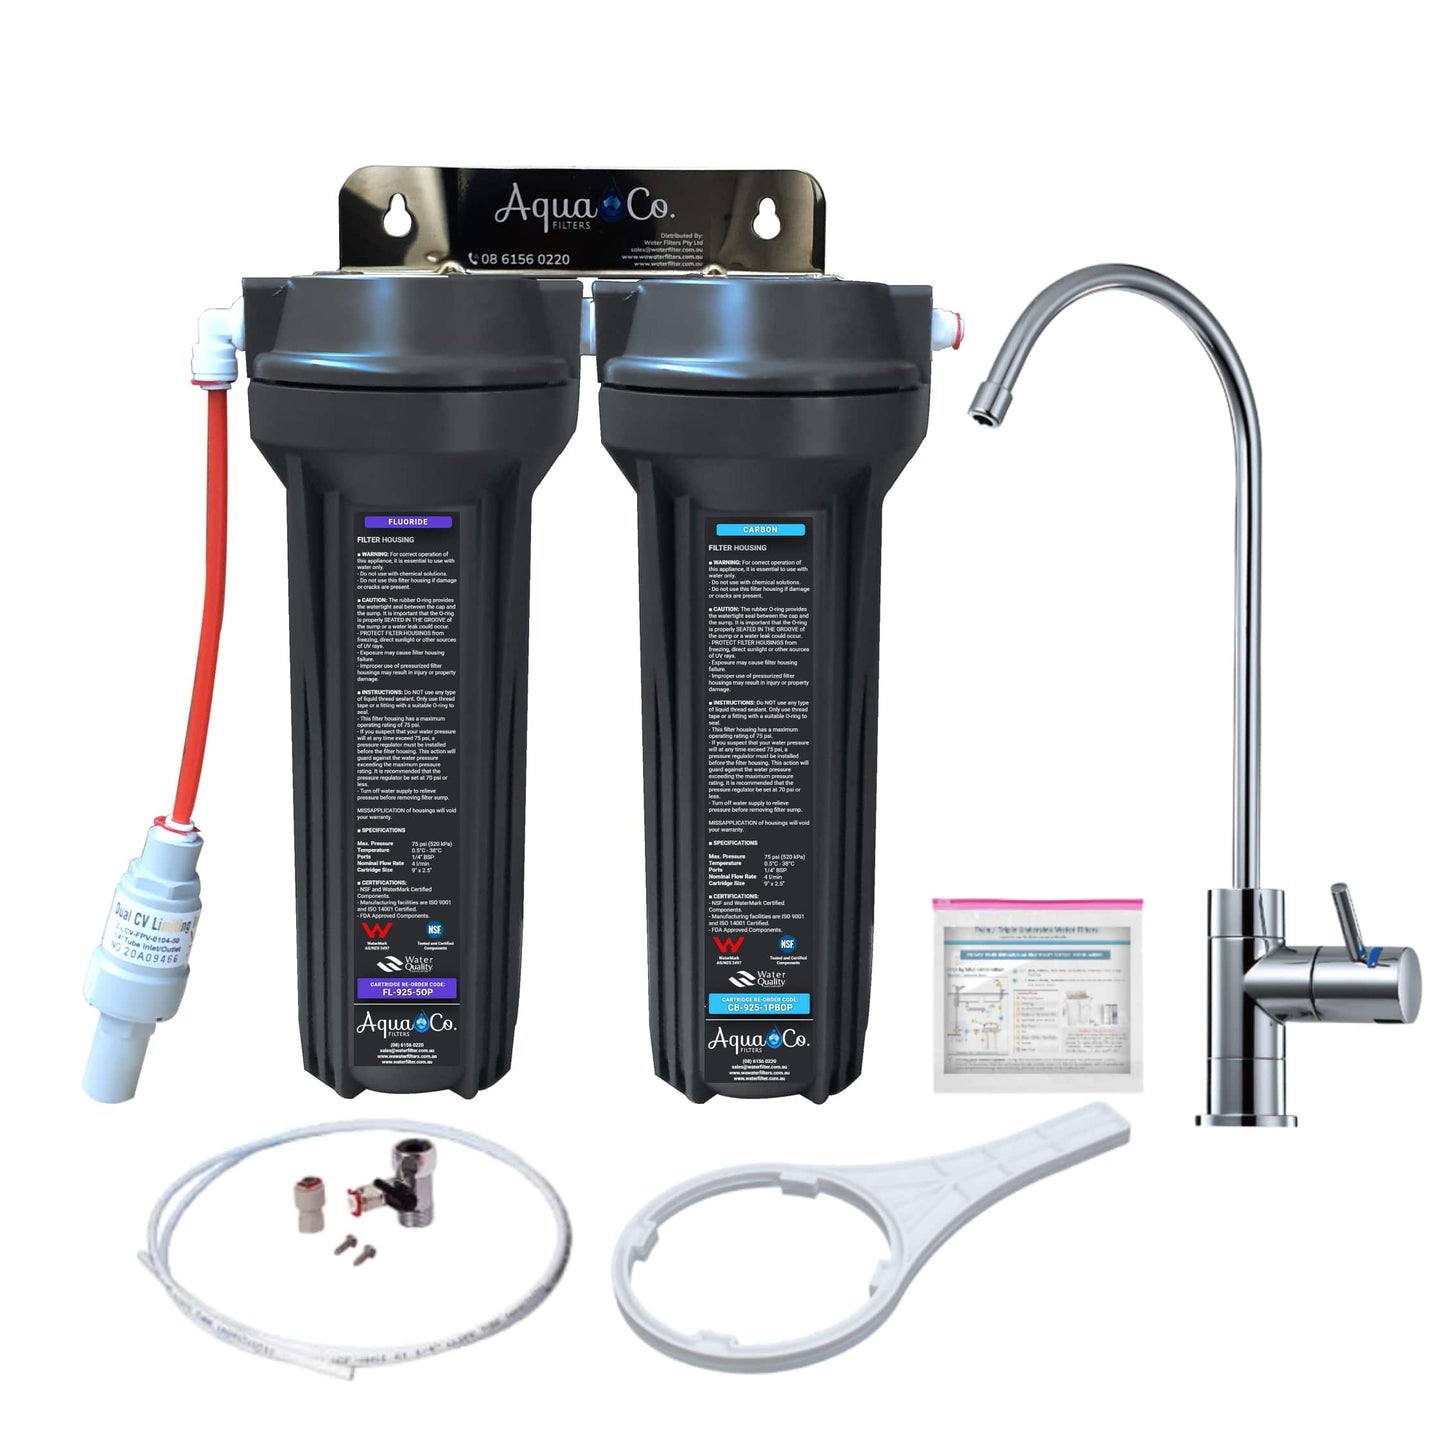 AquaCo SYS-925FC Undersink Water Filter - Reduces Chlorine, Taste, Odours, Parasites, Lead and Fluorides.